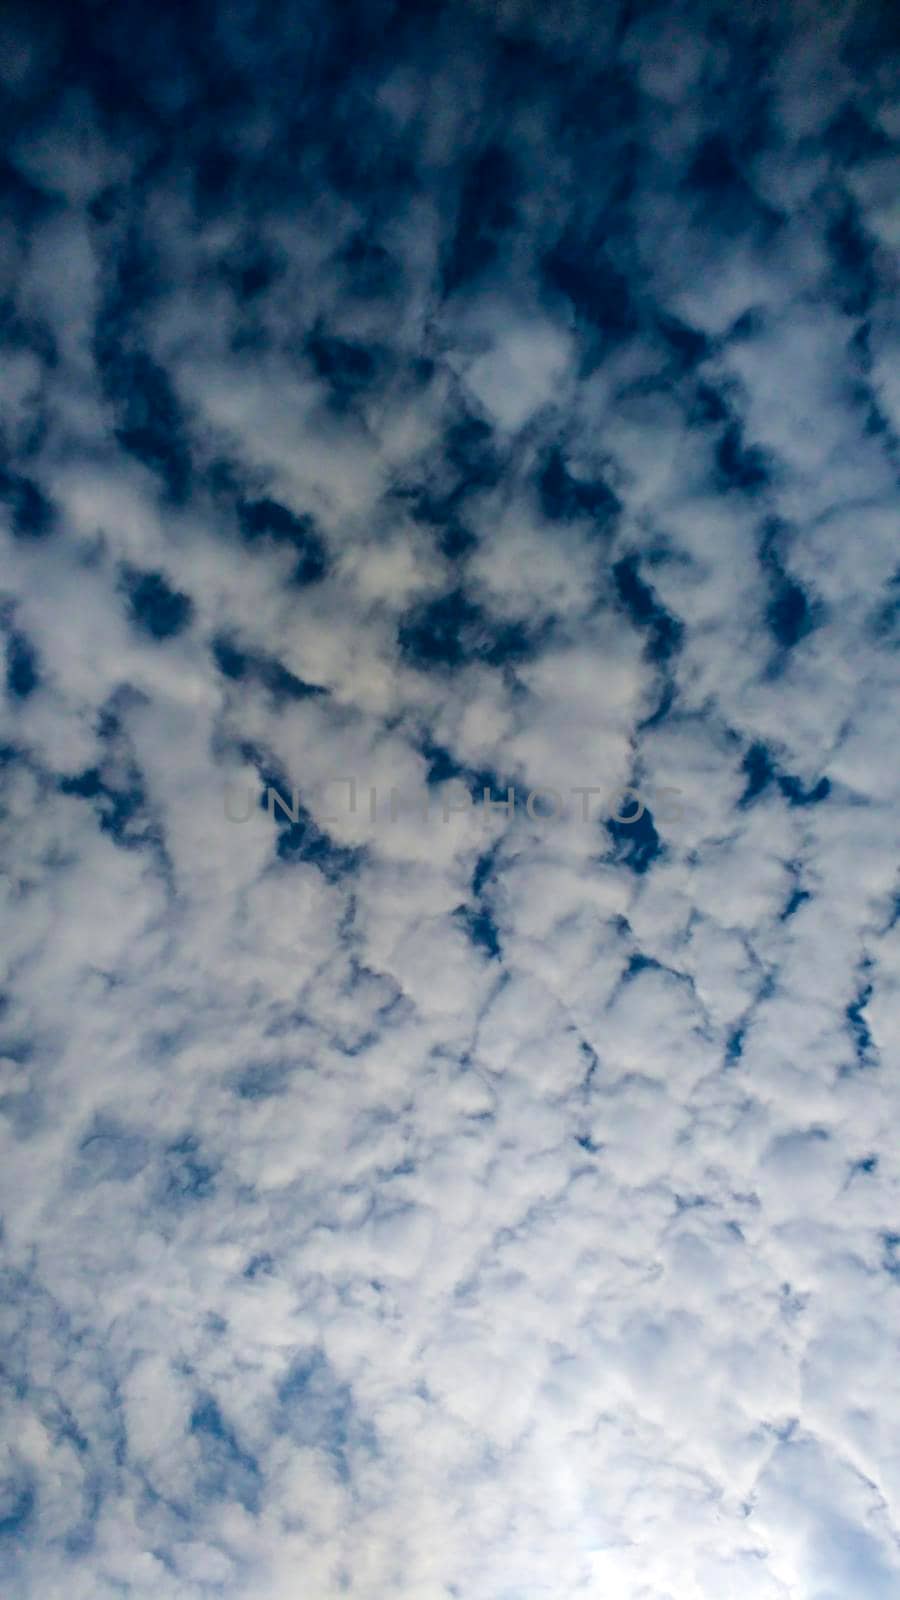 Sky with altomumulus clouds in Spain in winter